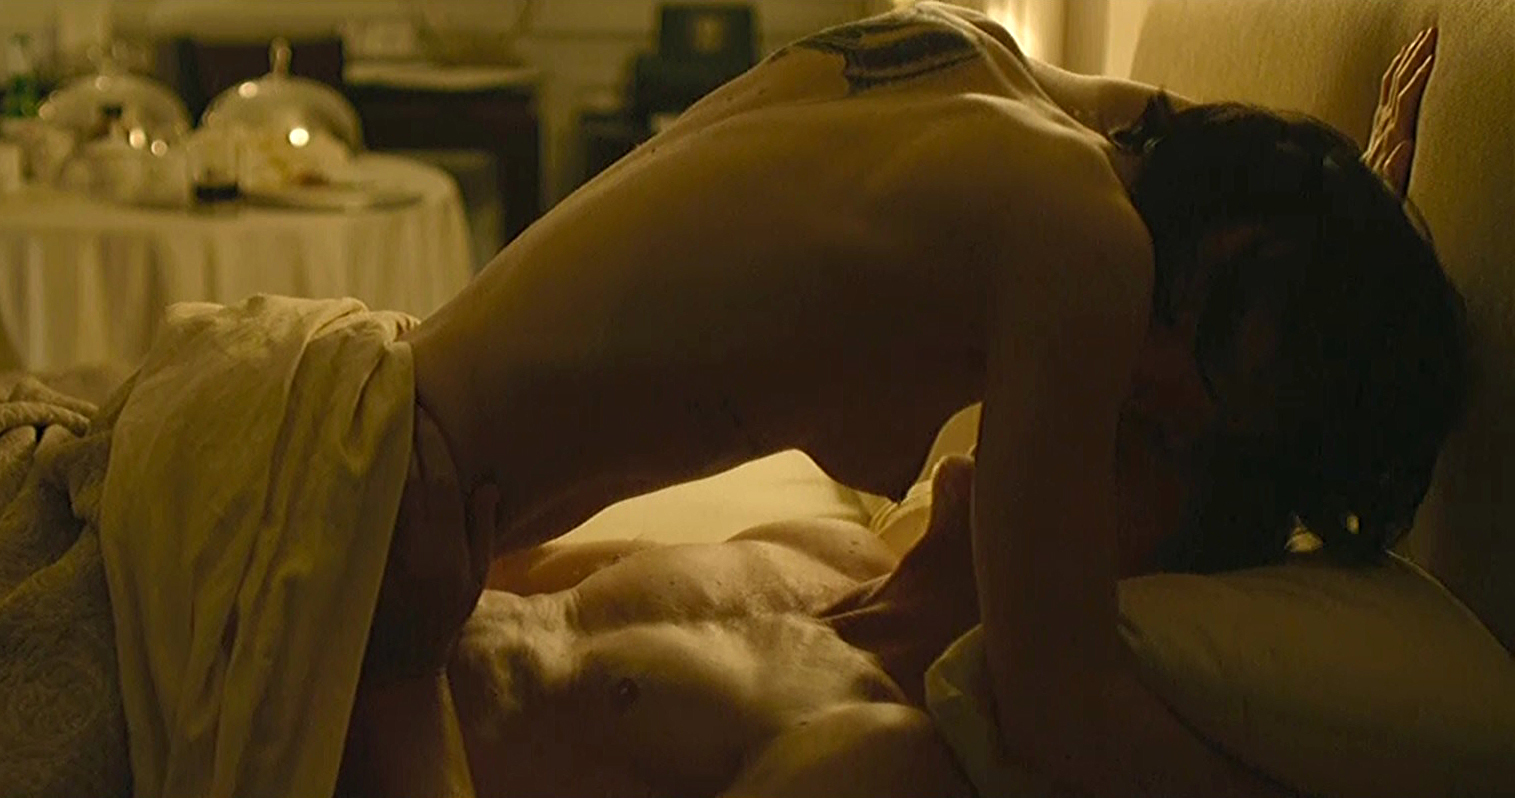 Rooney Mara Nude Sex Scene In The Girl With The Dragon Tattoo Movie.